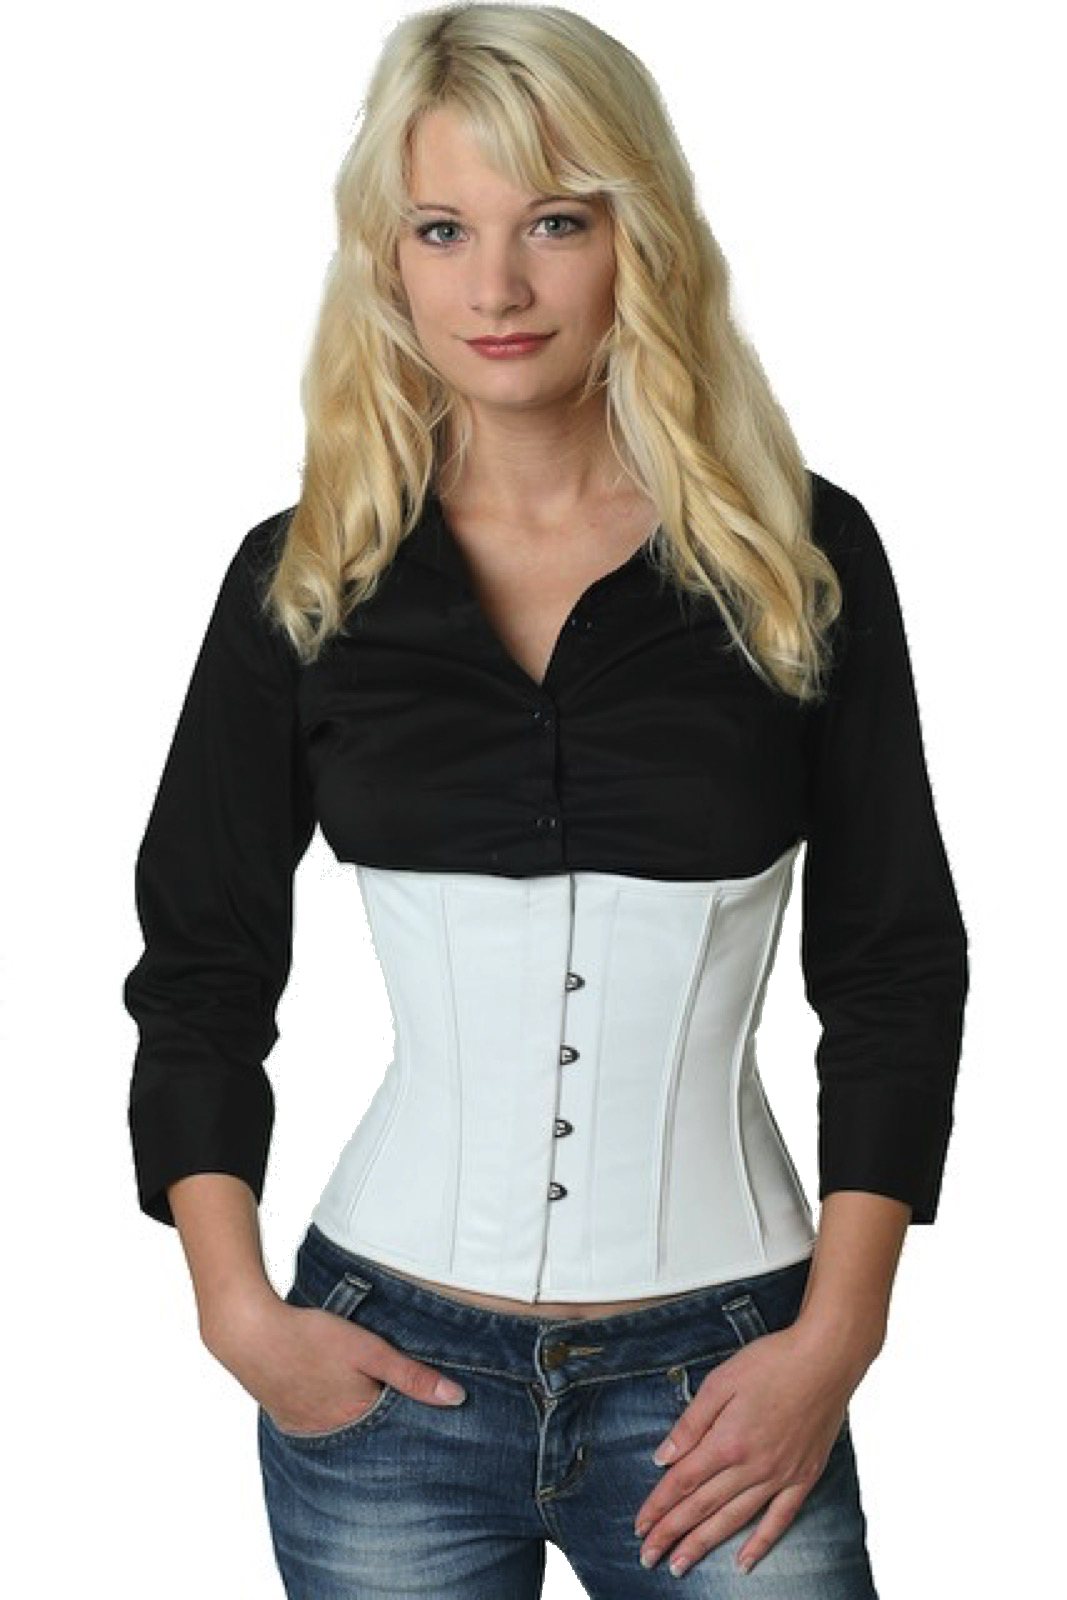 Corsage Corset White Leather Curved Normal Long ln21